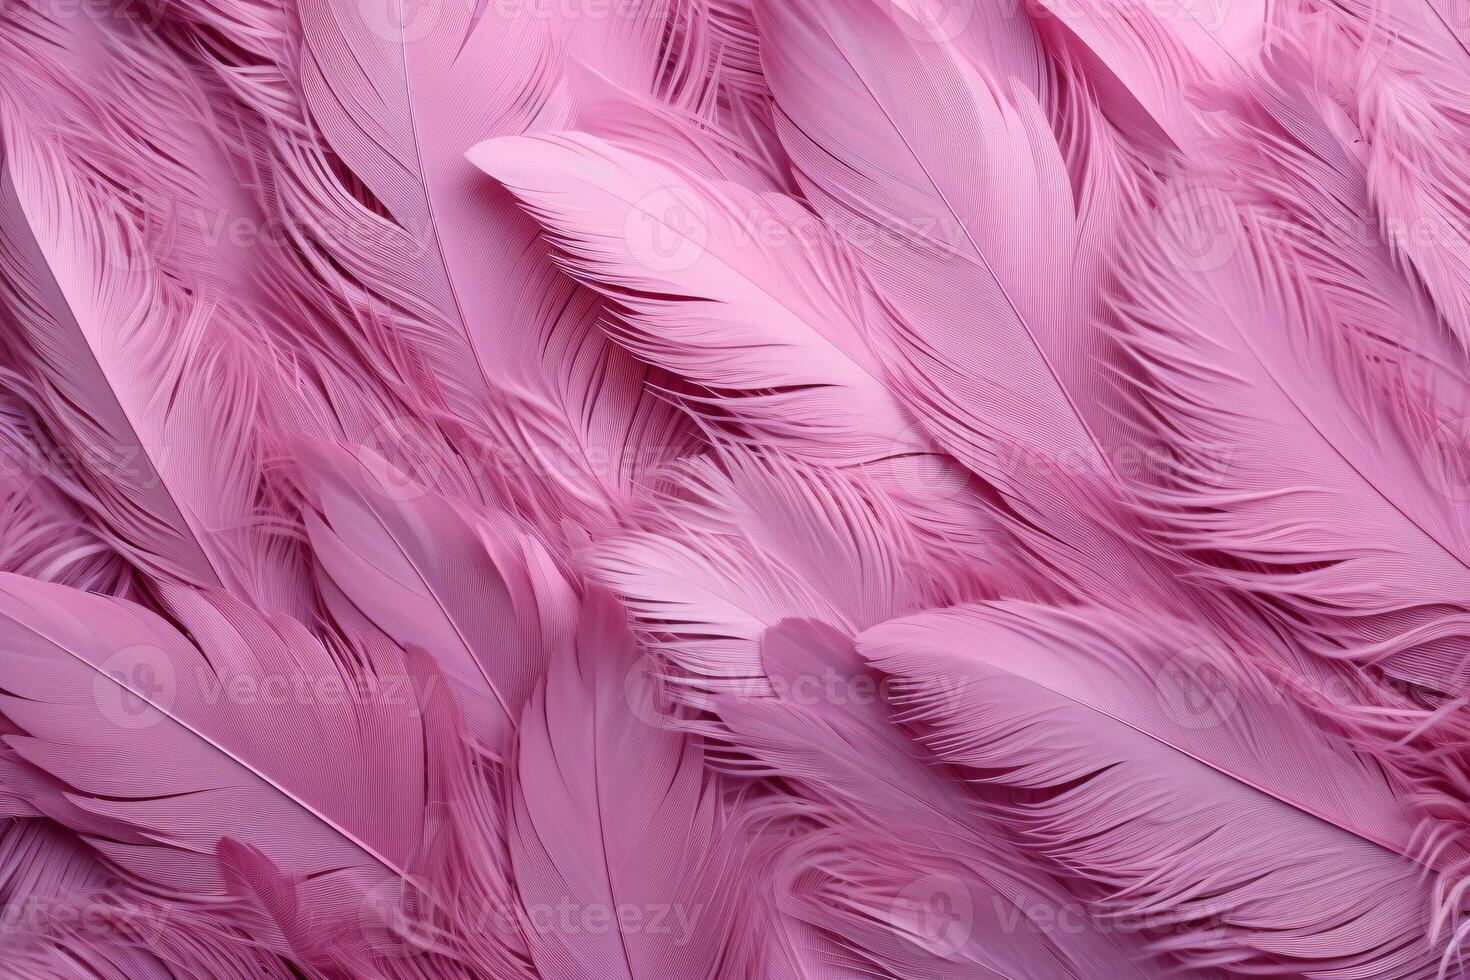 Pink Fluffy Feathers Background, Pink Feathers Pattern, Beautiful Feathers background, Feathers Wallpaper, bird feathers pattern, photo